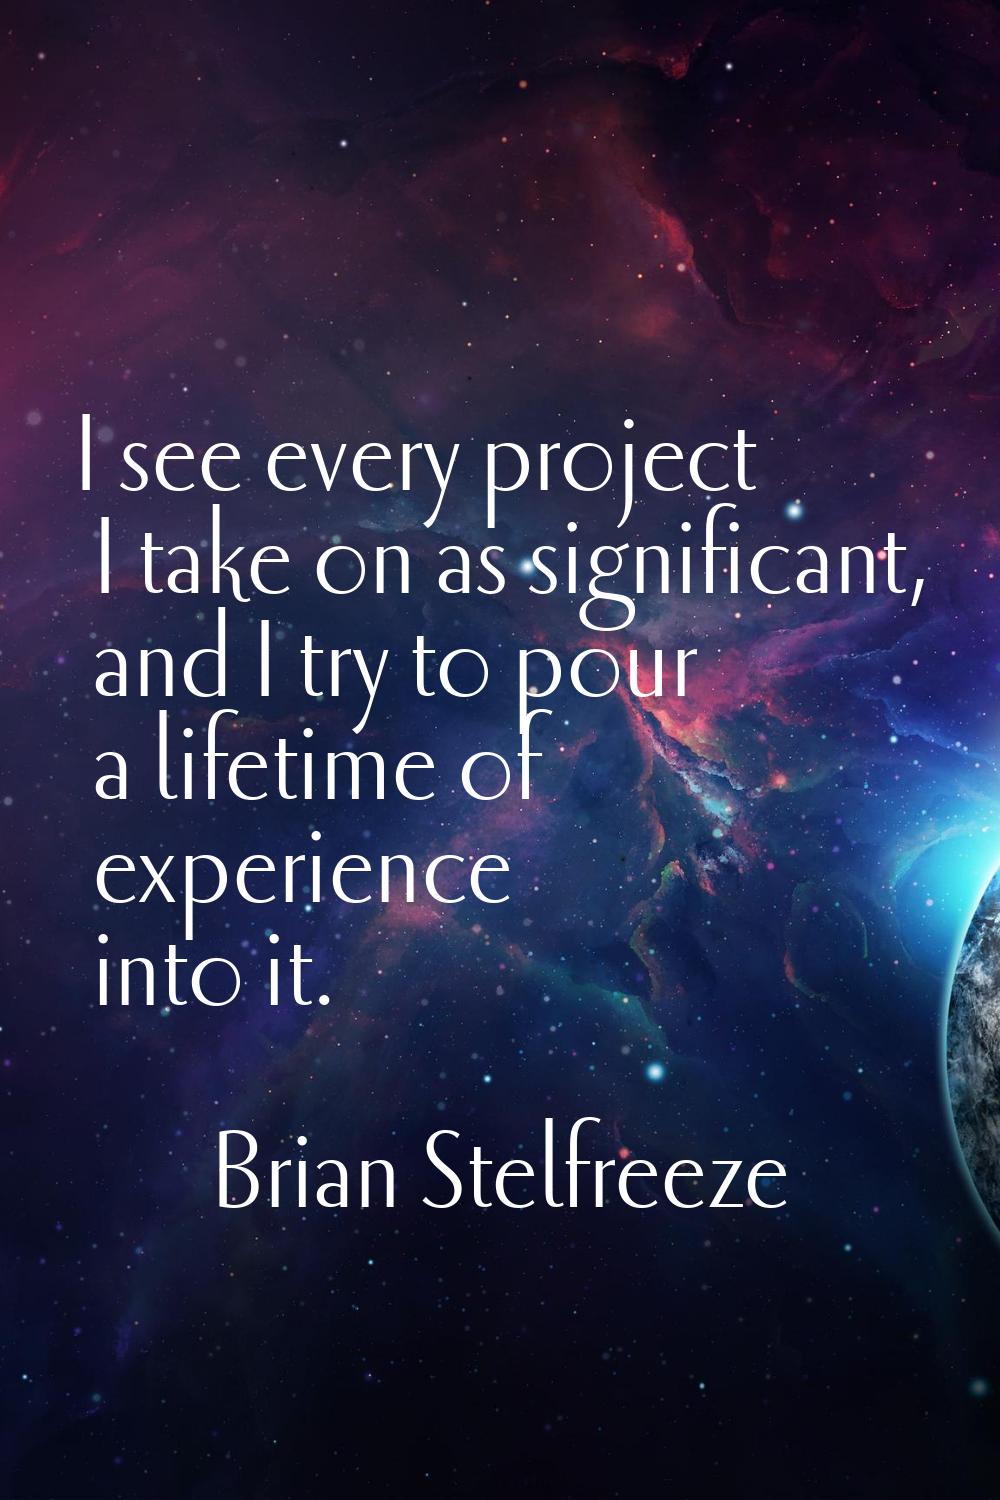 I see every project I take on as significant, and I try to pour a lifetime of experience into it.